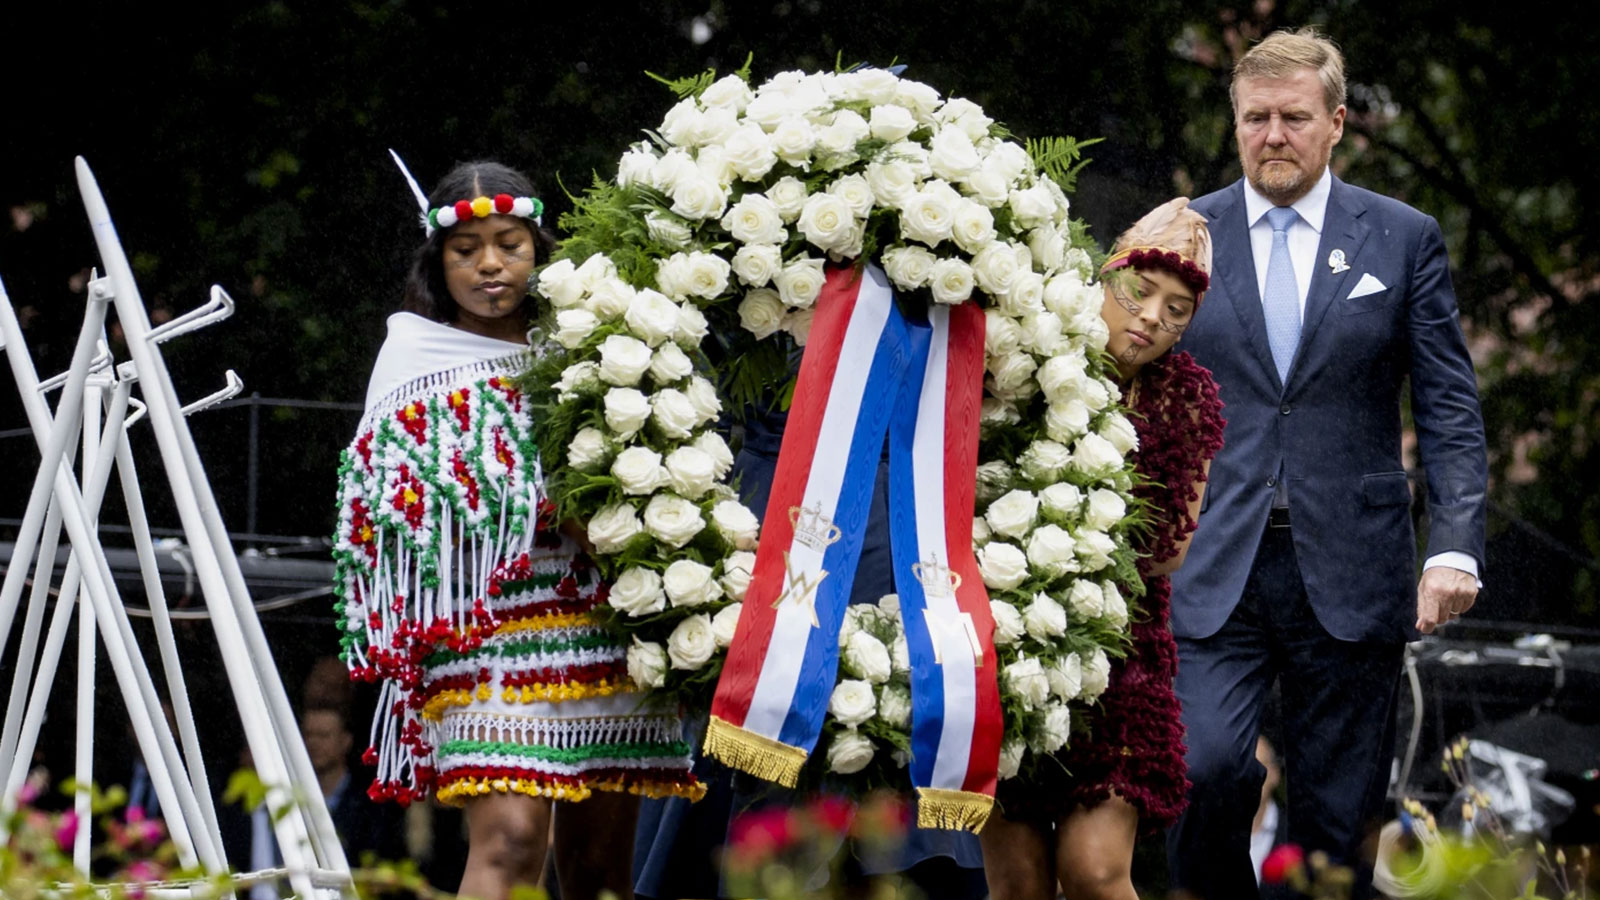 Dutch King Willem-Alexander lays a wreath at the slavery monument after apologising for the royal house’s role in slavery and asked forgiveness in a speech greeted by cheers and whoops at an event to commemorate the anniversary of the country abolishing slavery in Amsterdam, Netherlands, Saturday, July 1, 2023.